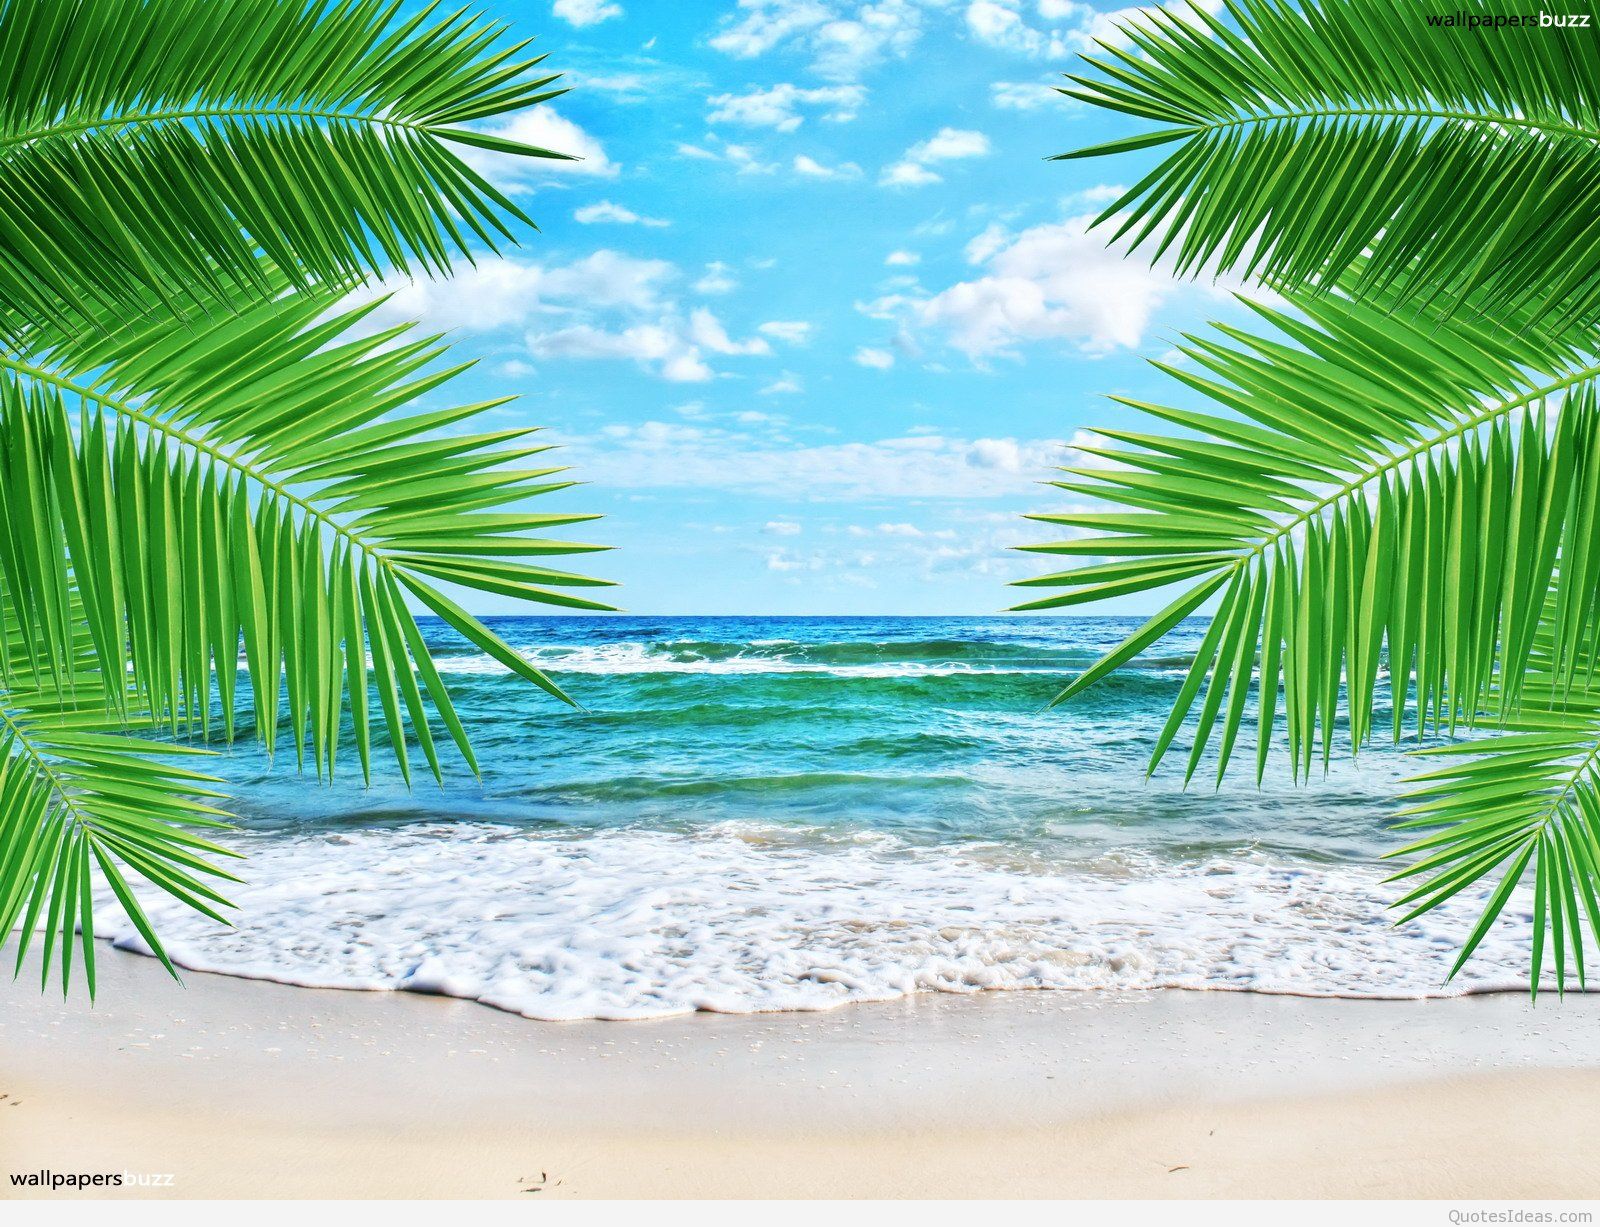 Free Download Summer Wallpaper 31 High Quality Summer Wallpapers Full